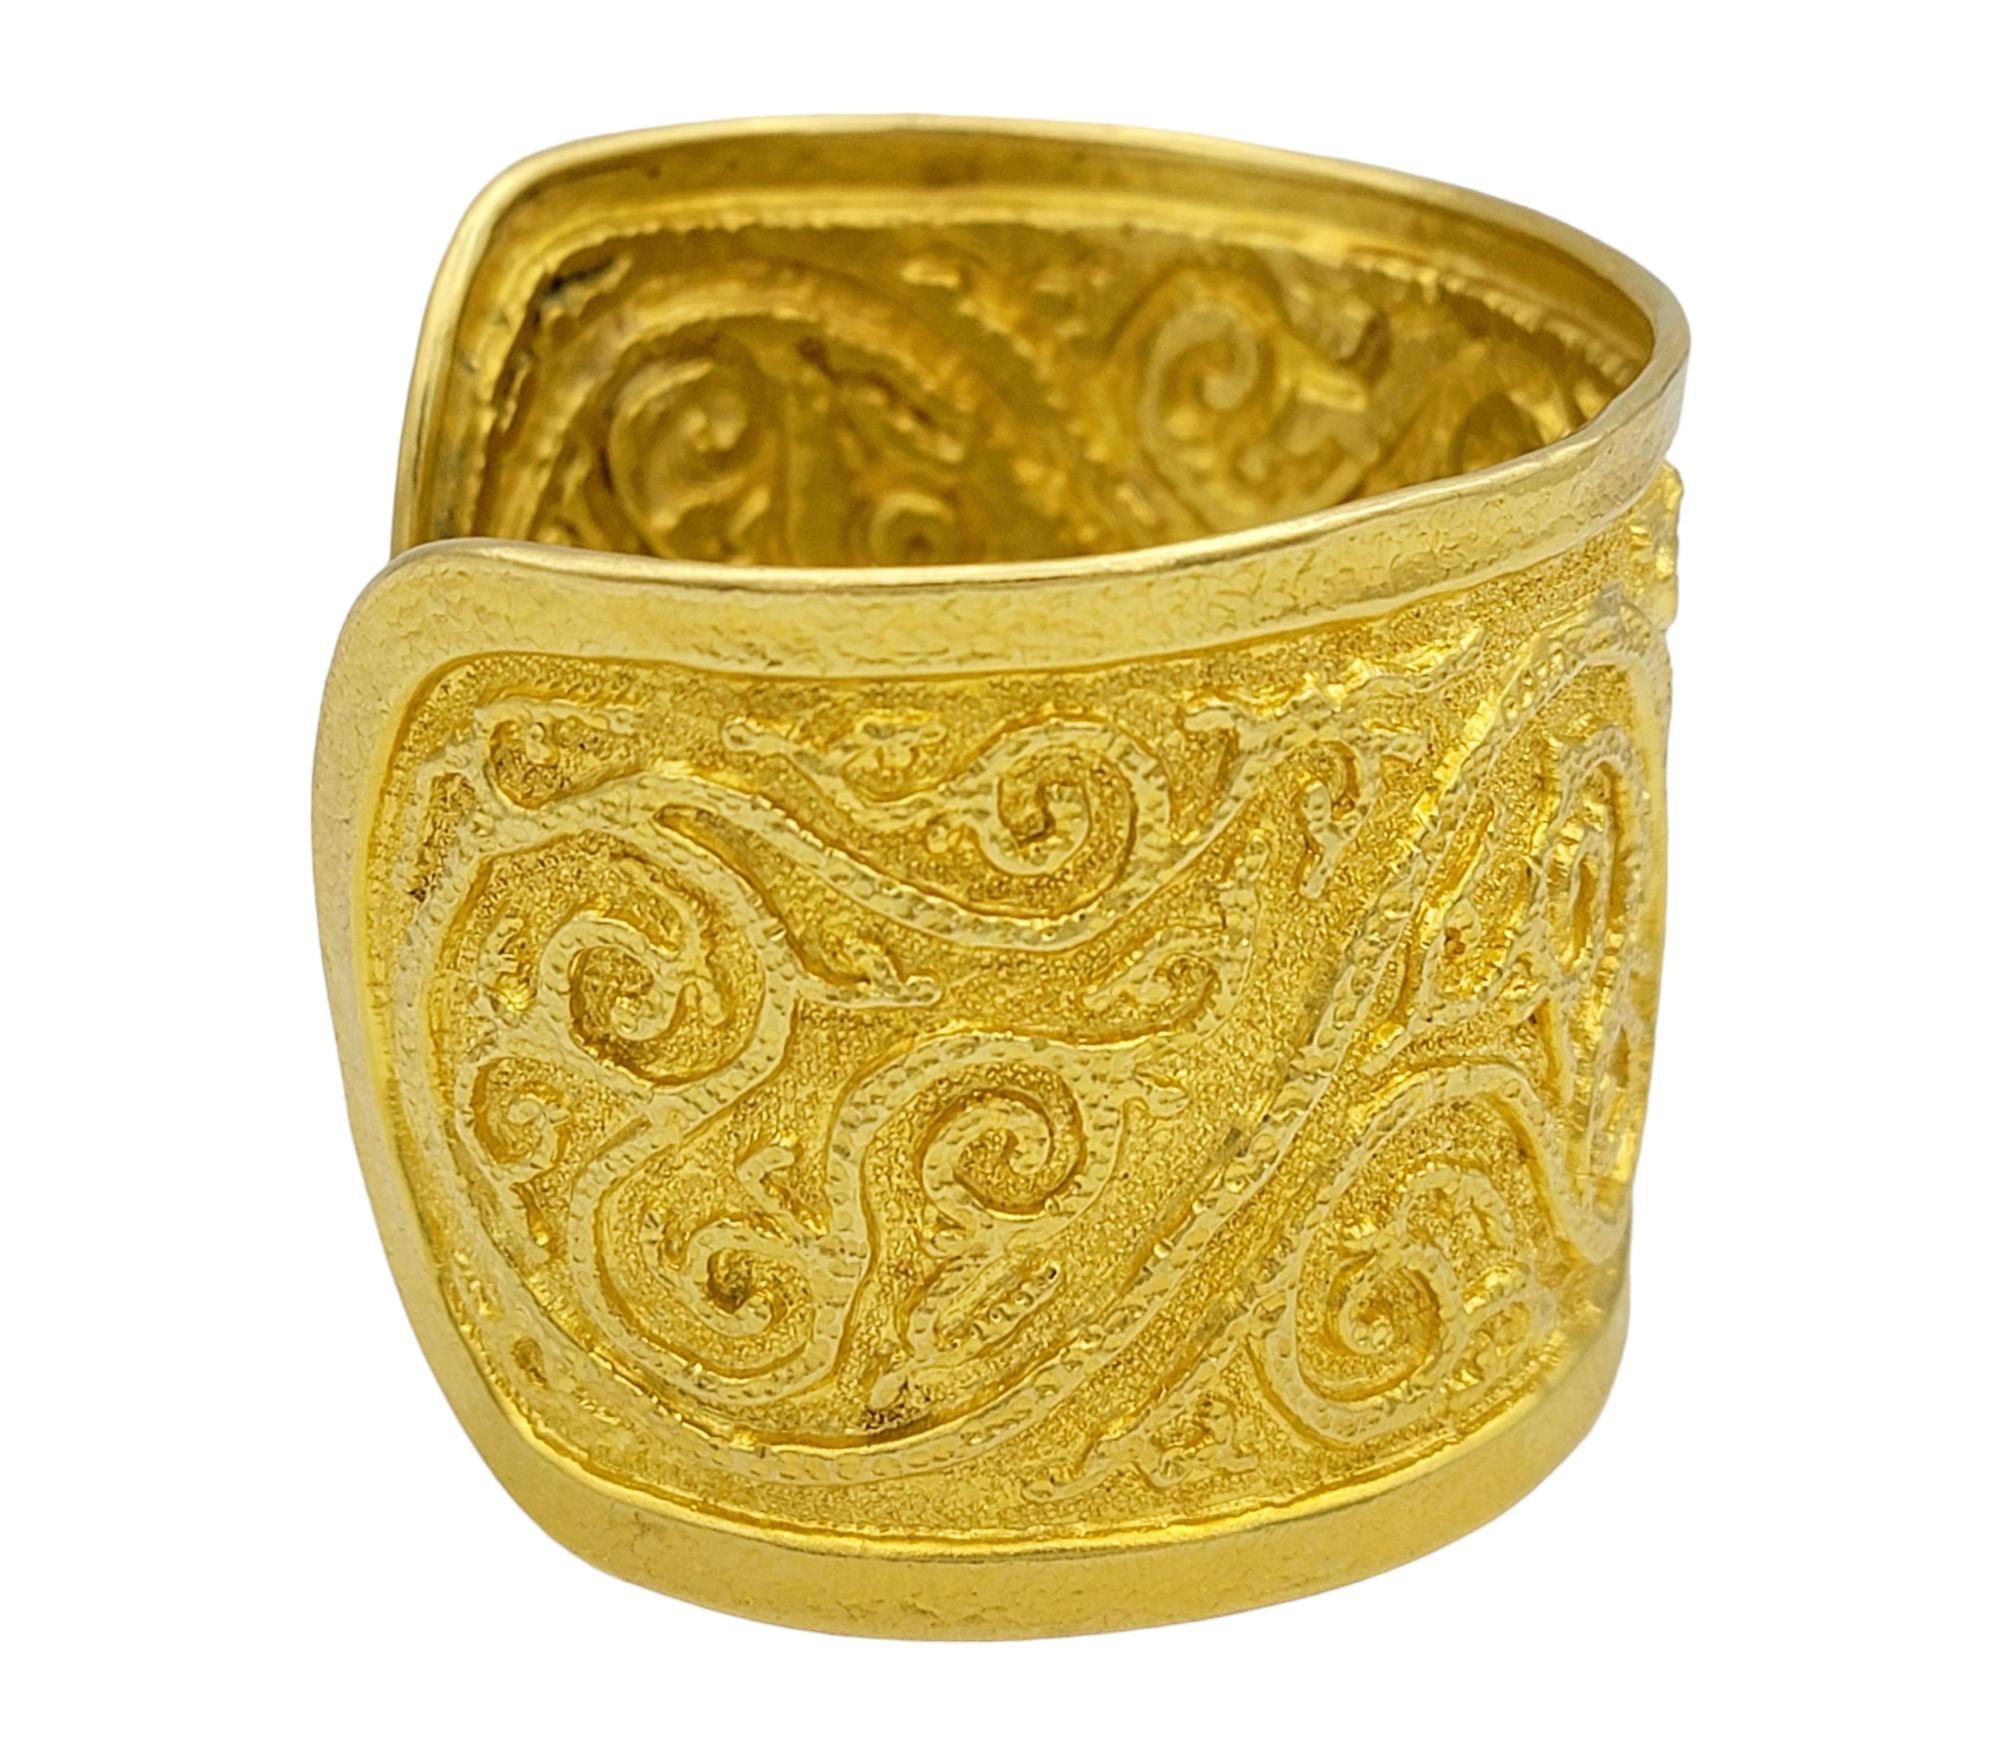 Women's or Men's 22 Karat Yellow Gold Wide Cuff Bracelet with Multi-Textured Scroll Design For Sale